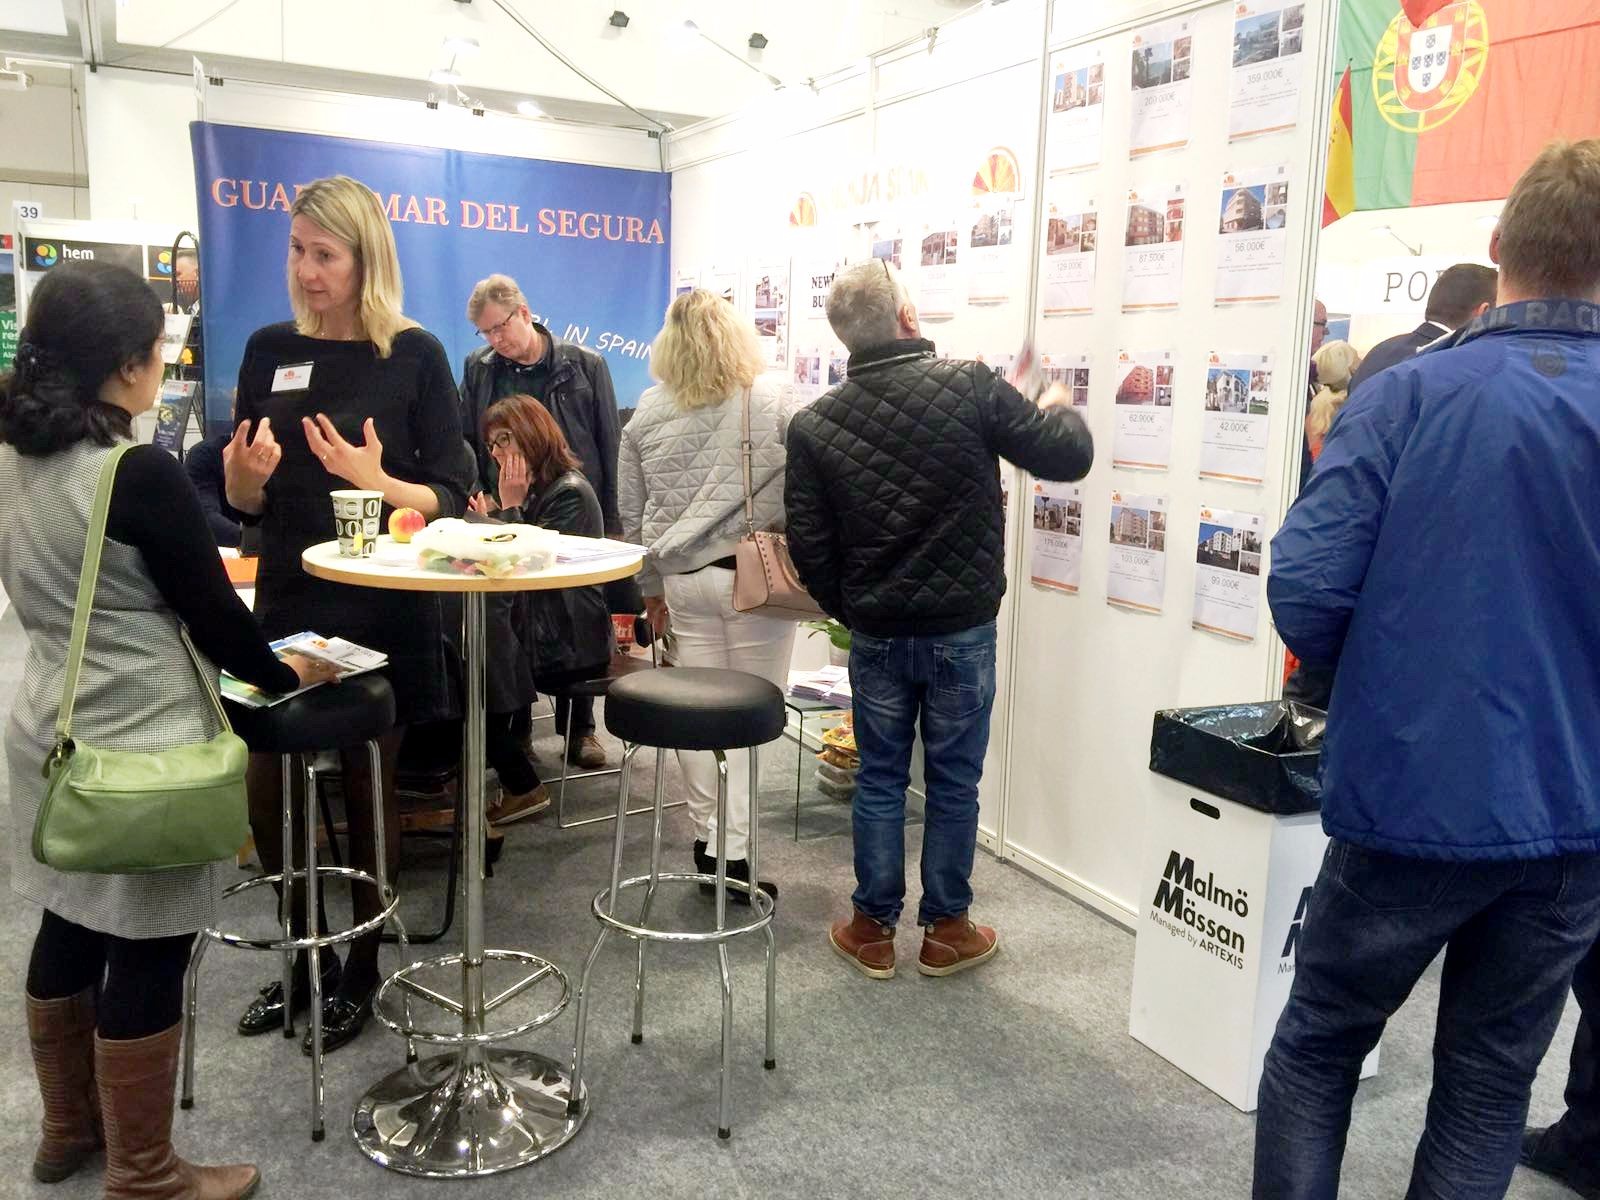 On Real Estate Fair in Malmoe, Sweden. 